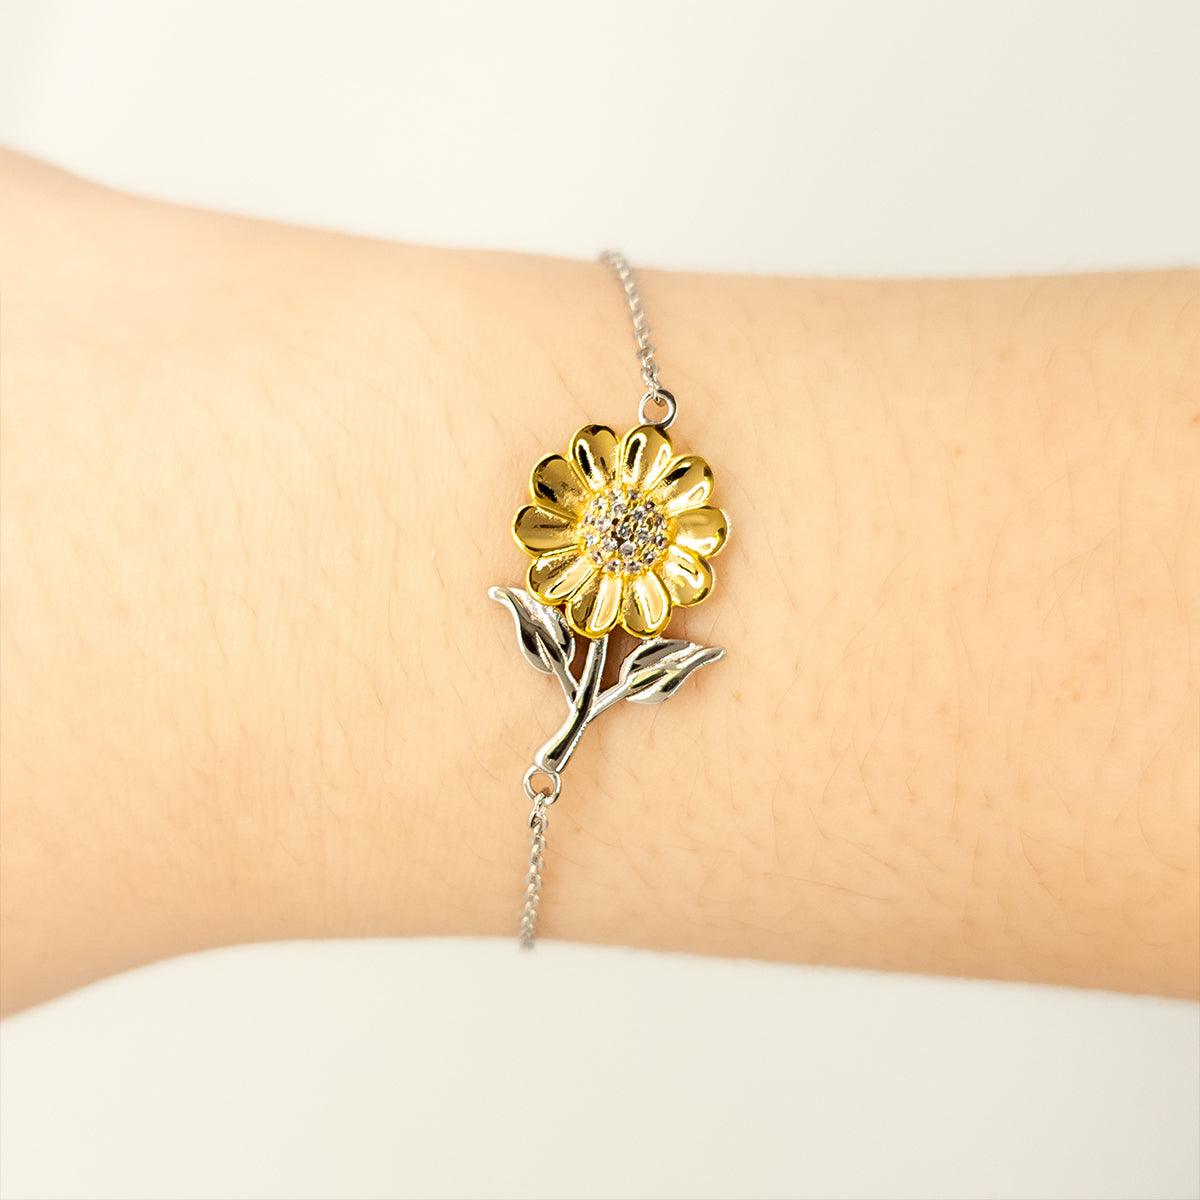 Remarkable Civil Engineer Gifts, Your dedication and hard work, Inspirational Birthday Christmas Unique Sunflower Bracelet For Civil Engineer, Coworkers, Men, Women, Friends - Mallard Moon Gift Shop